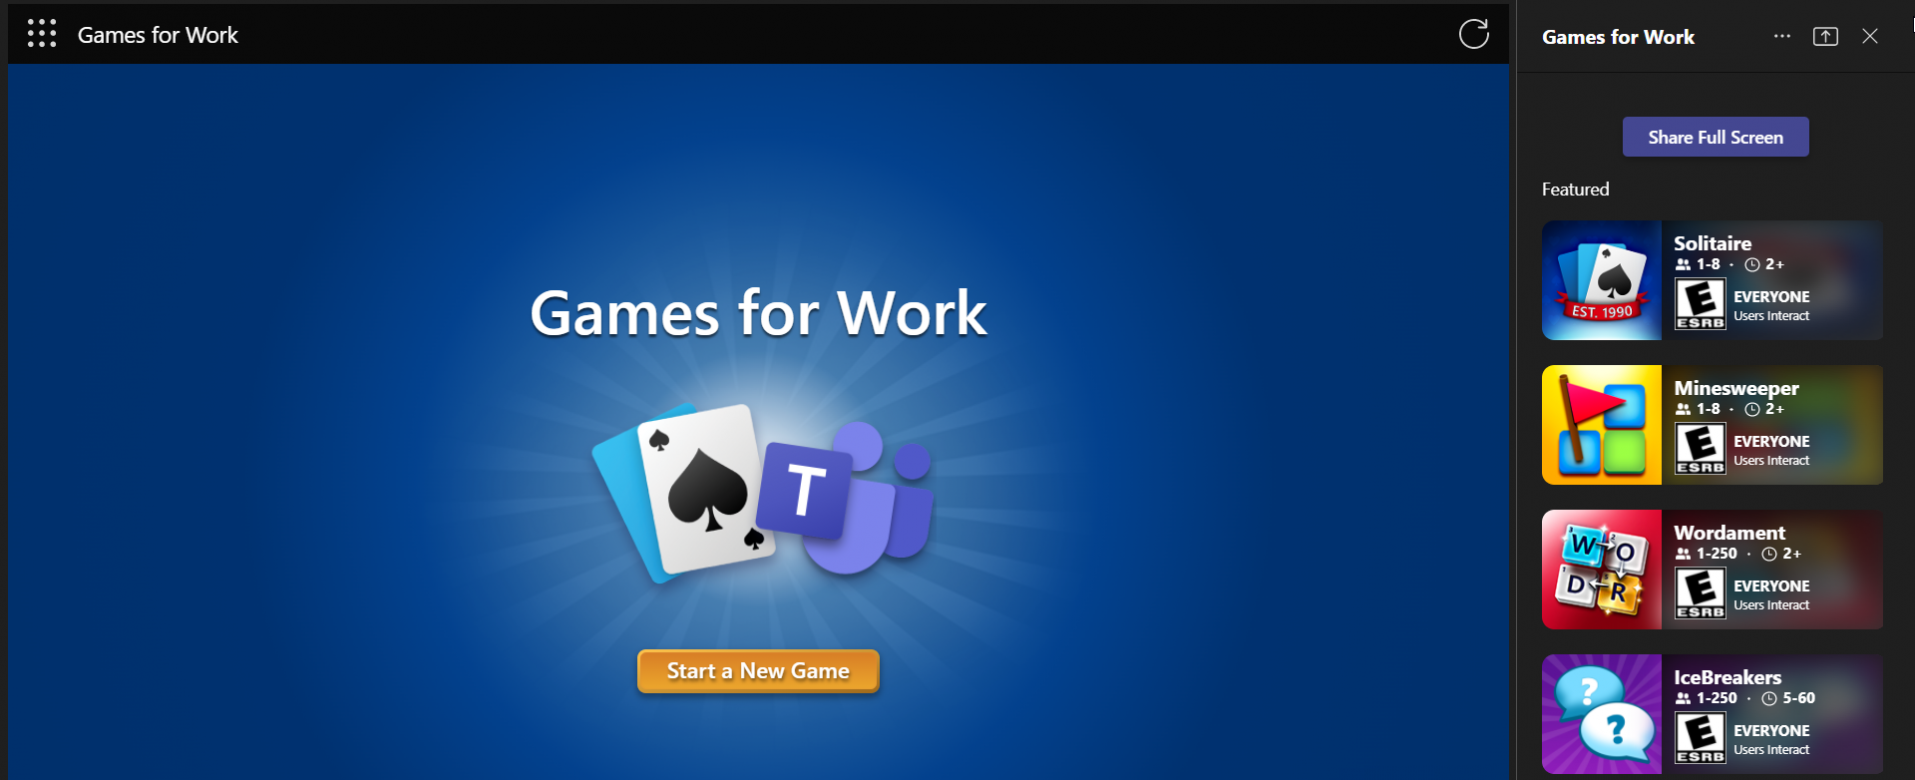 A screenshot depicting all the games that are available in "Games for Work".